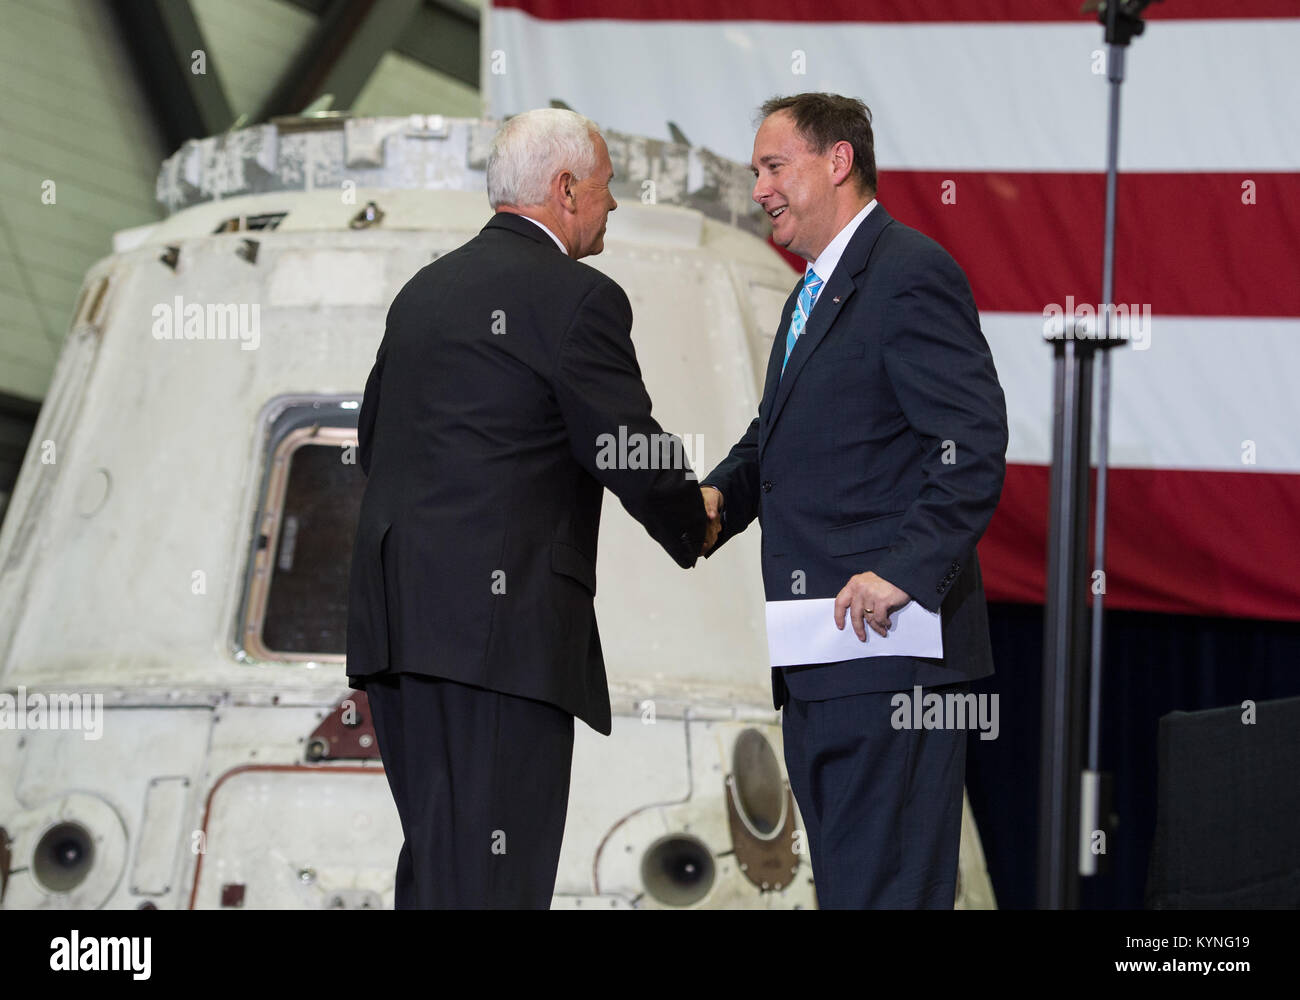 Vice President Mike Pence shakes hands with Acting NASA Administrator Robert Lightfoot before addressing NASA employees, Thursday, July 6, 2017, at the Vehicle Assembly Building at NASA’s Kennedy Space Center (KSC) in Cape Canaveral, Florida. The Vice President thanked employees for advancing American leadership in space, before going on a tour of the center that highlighted the public-private partnerships at KSC, as both NASA and commercial companies prepare to launch American astronauts from the multi-user spaceport. Photo Credit: (NASA/Aubrey Gemignani) Stock Photo